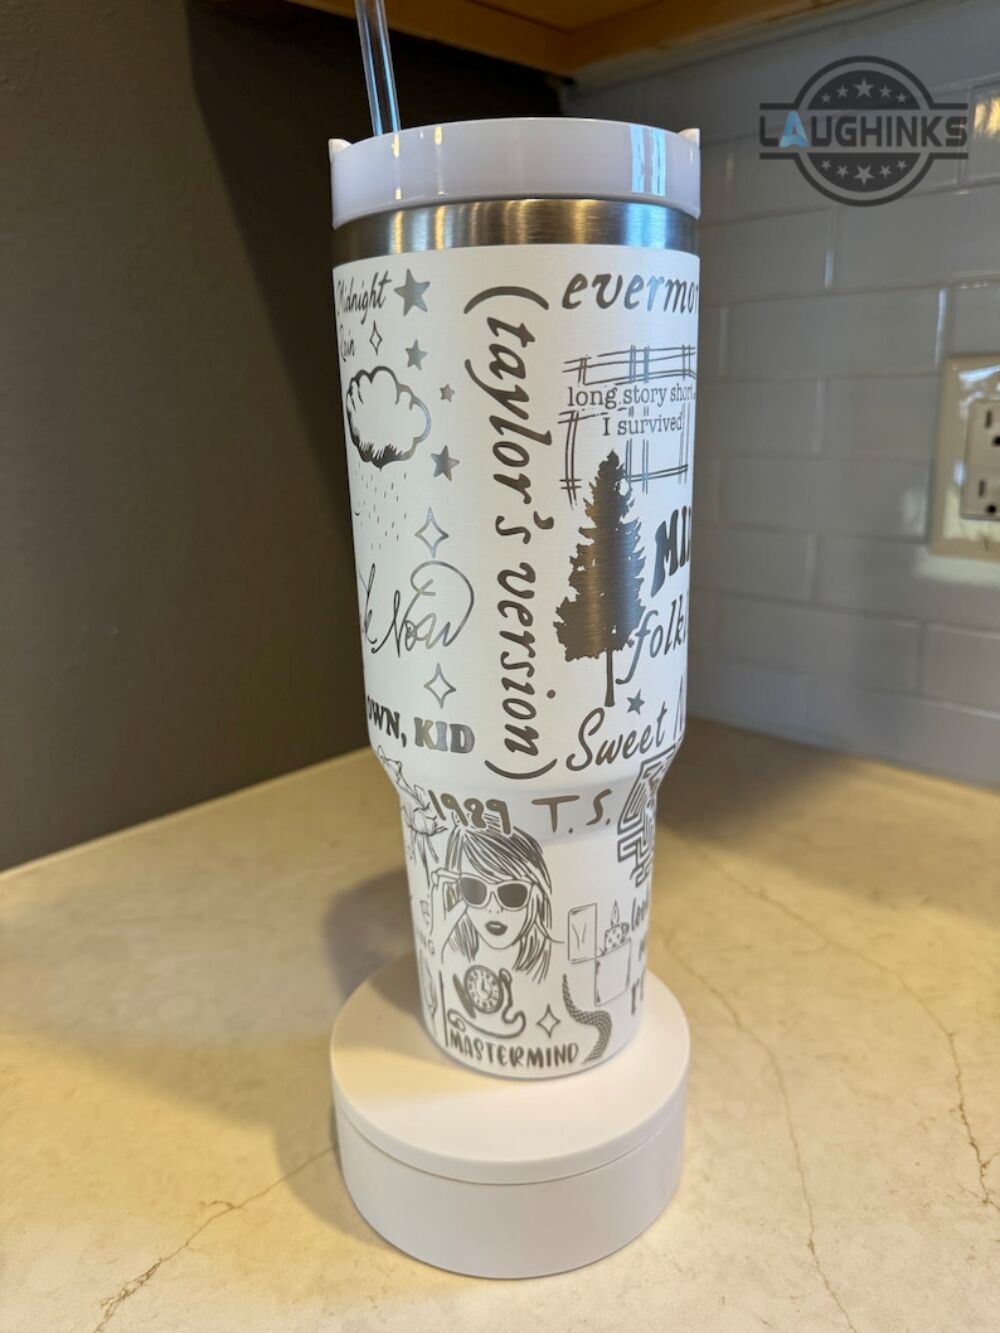 Lover Stanley Cup 40 Oz Taylor Swift Stanley Tumbler Dupe 40Oz The